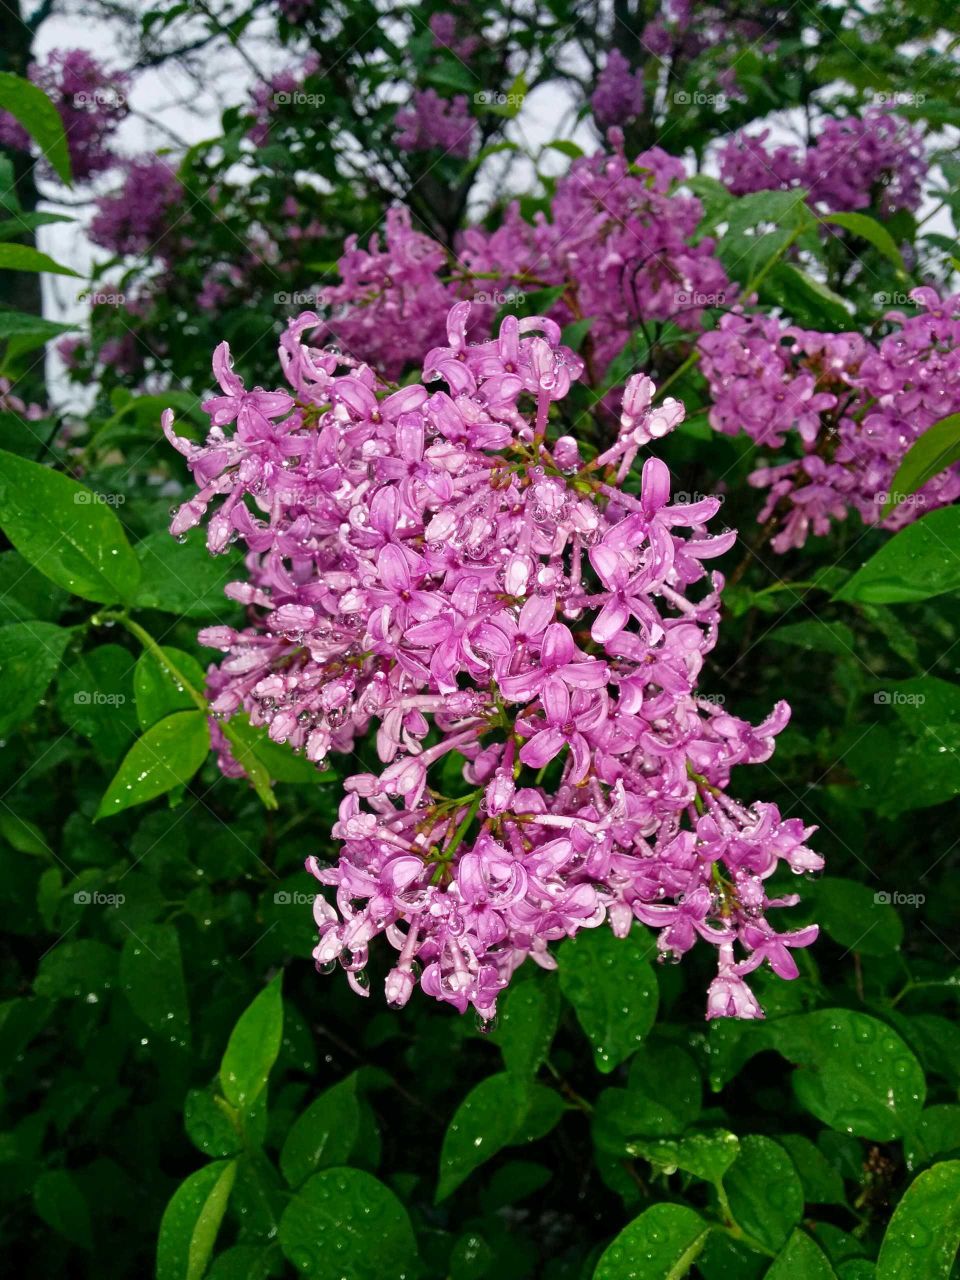 drizzle flowers